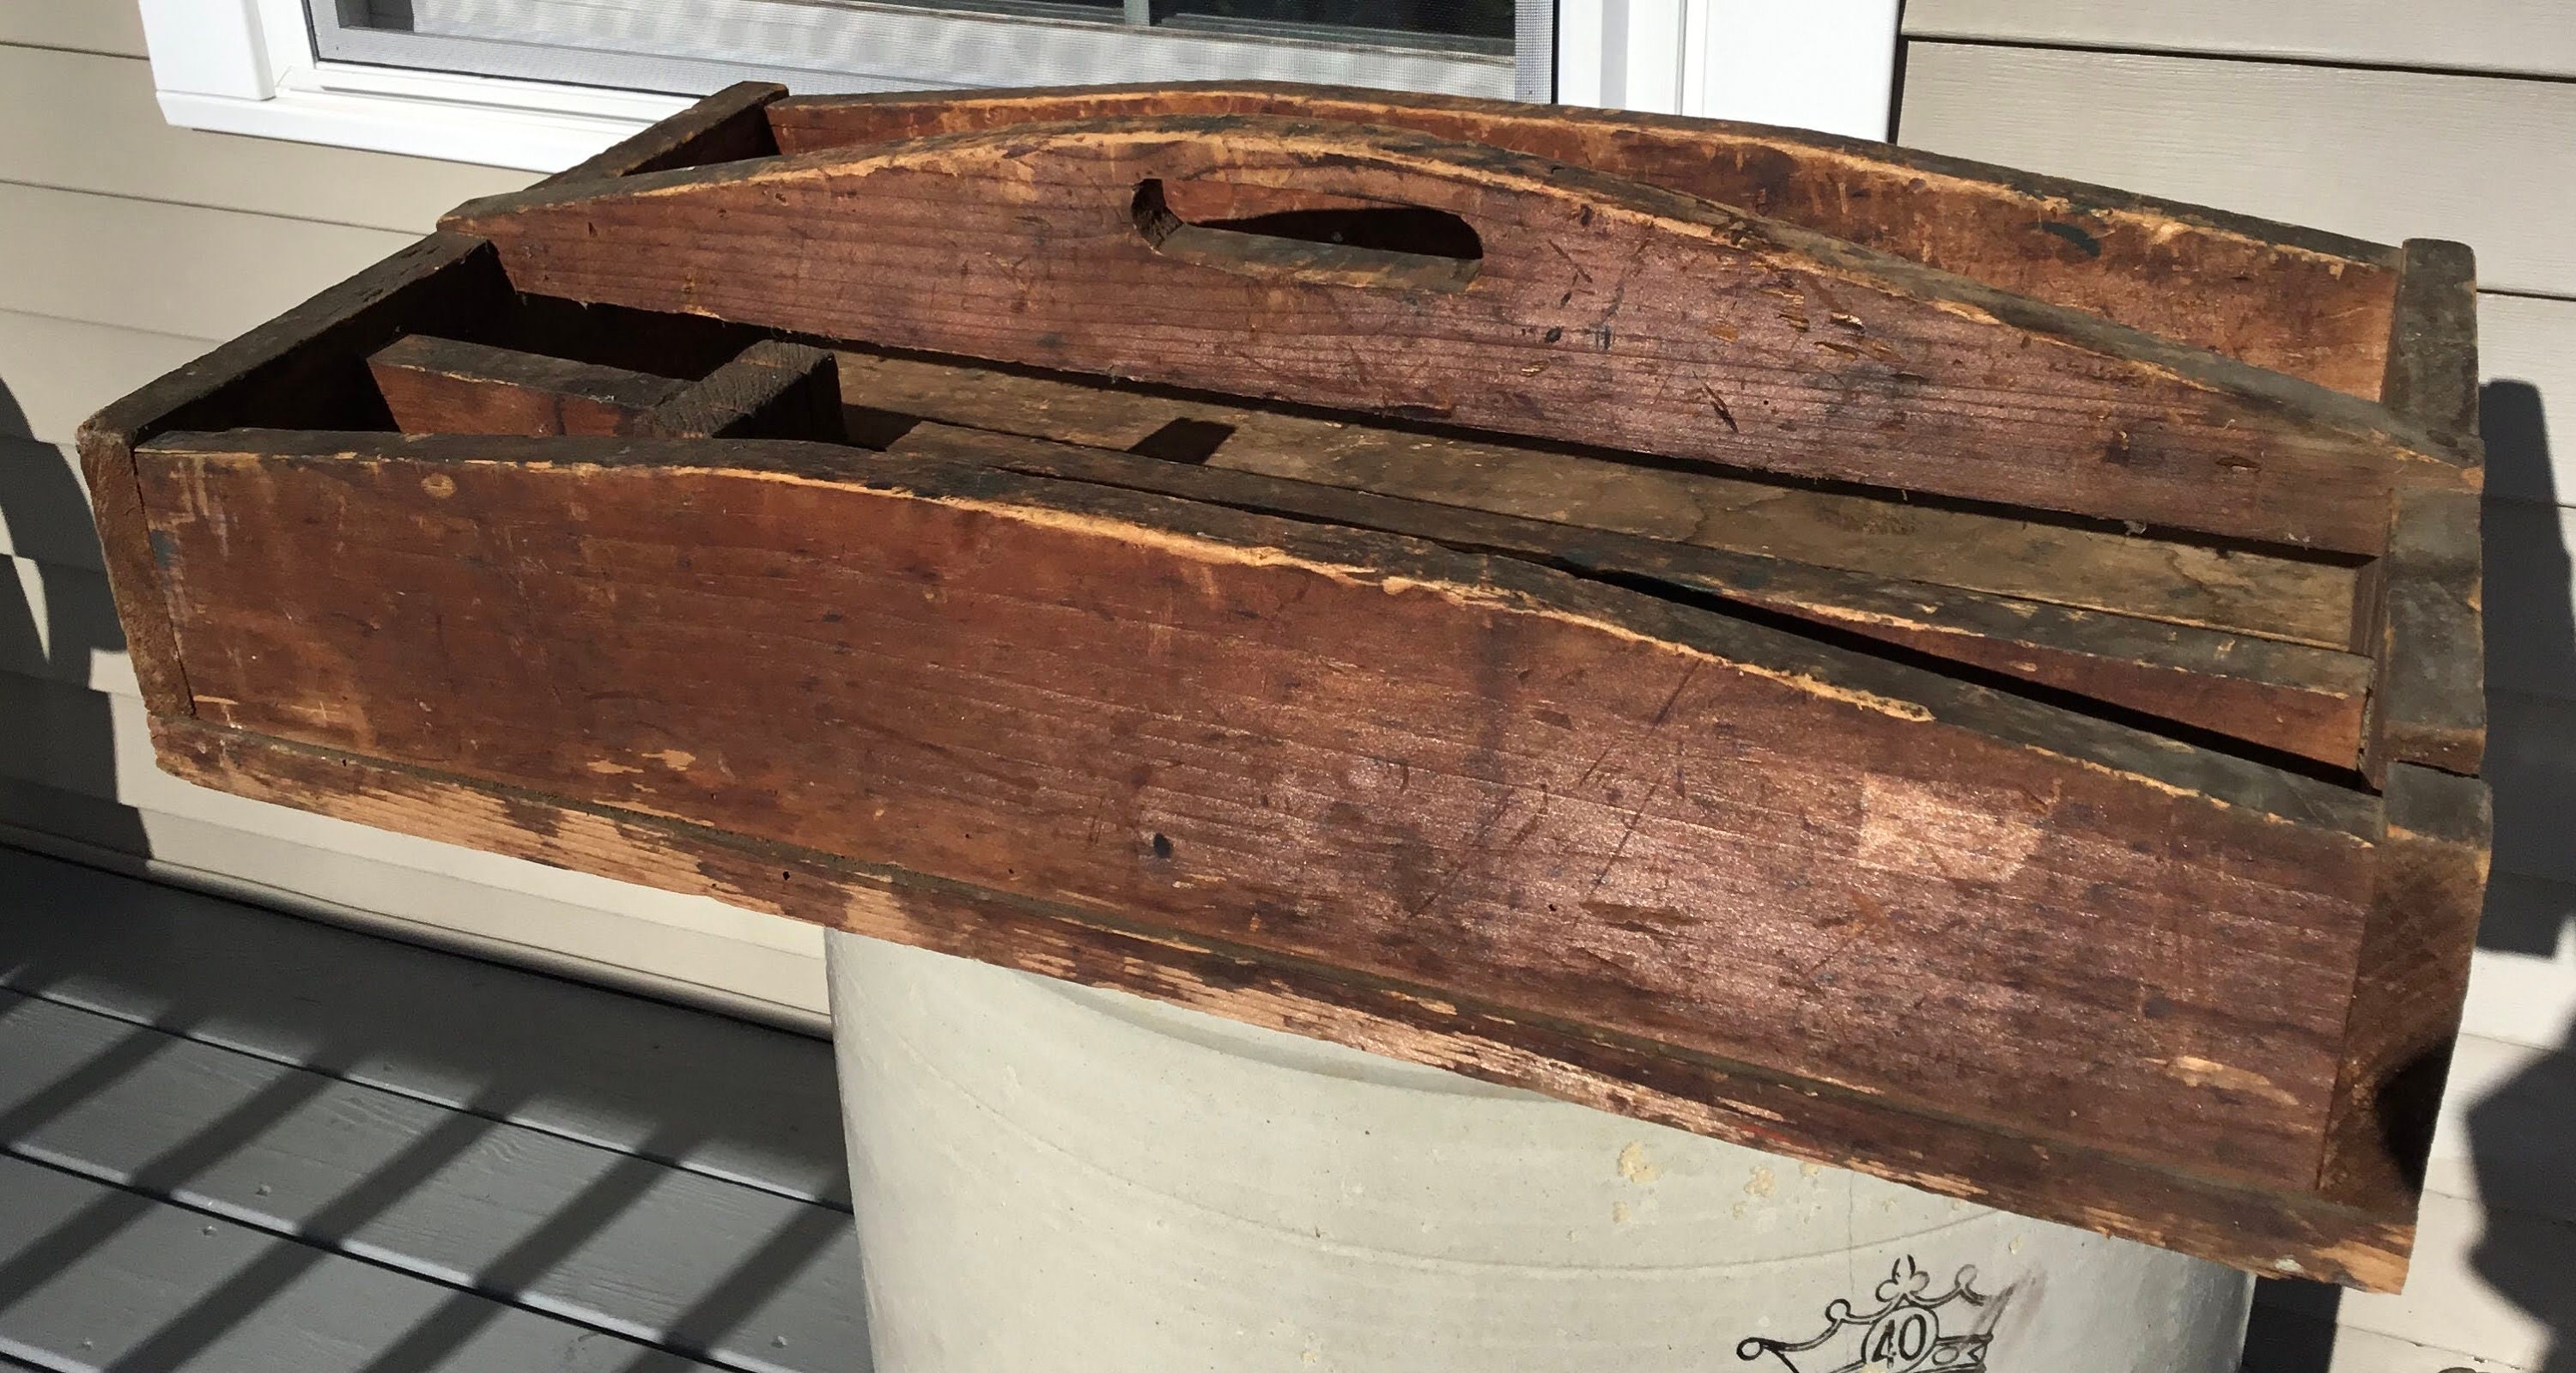 Wooden Tool Box Large Vintage Wood Carrier Antique Gathering